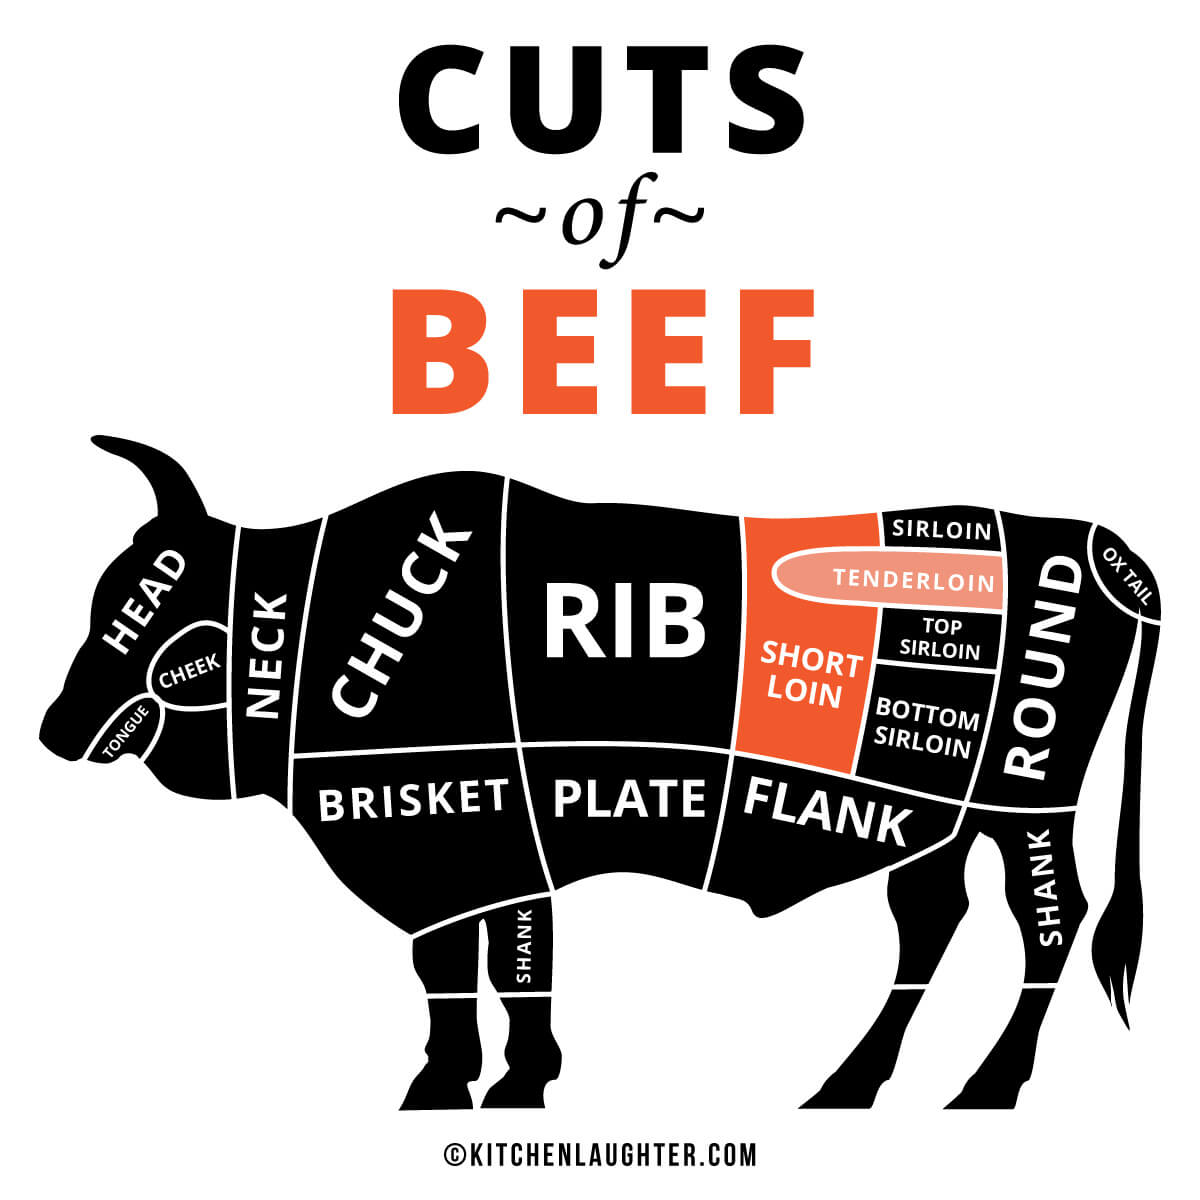 Image of beef cuts with short loin and tenderloin highlighted.